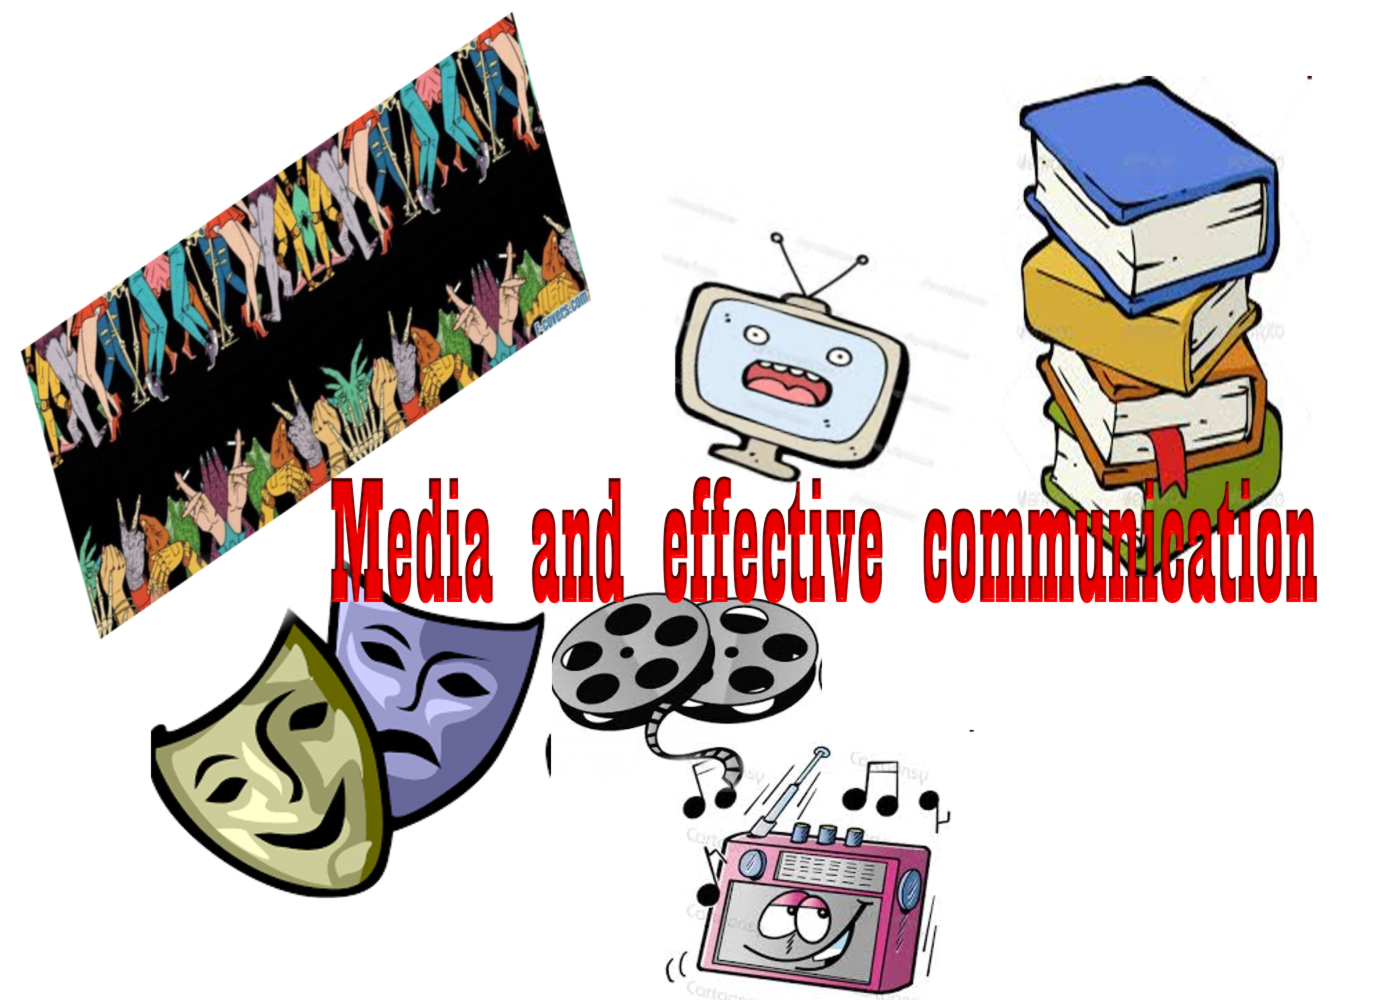 Articles: The advantages and disadvantages of mass media